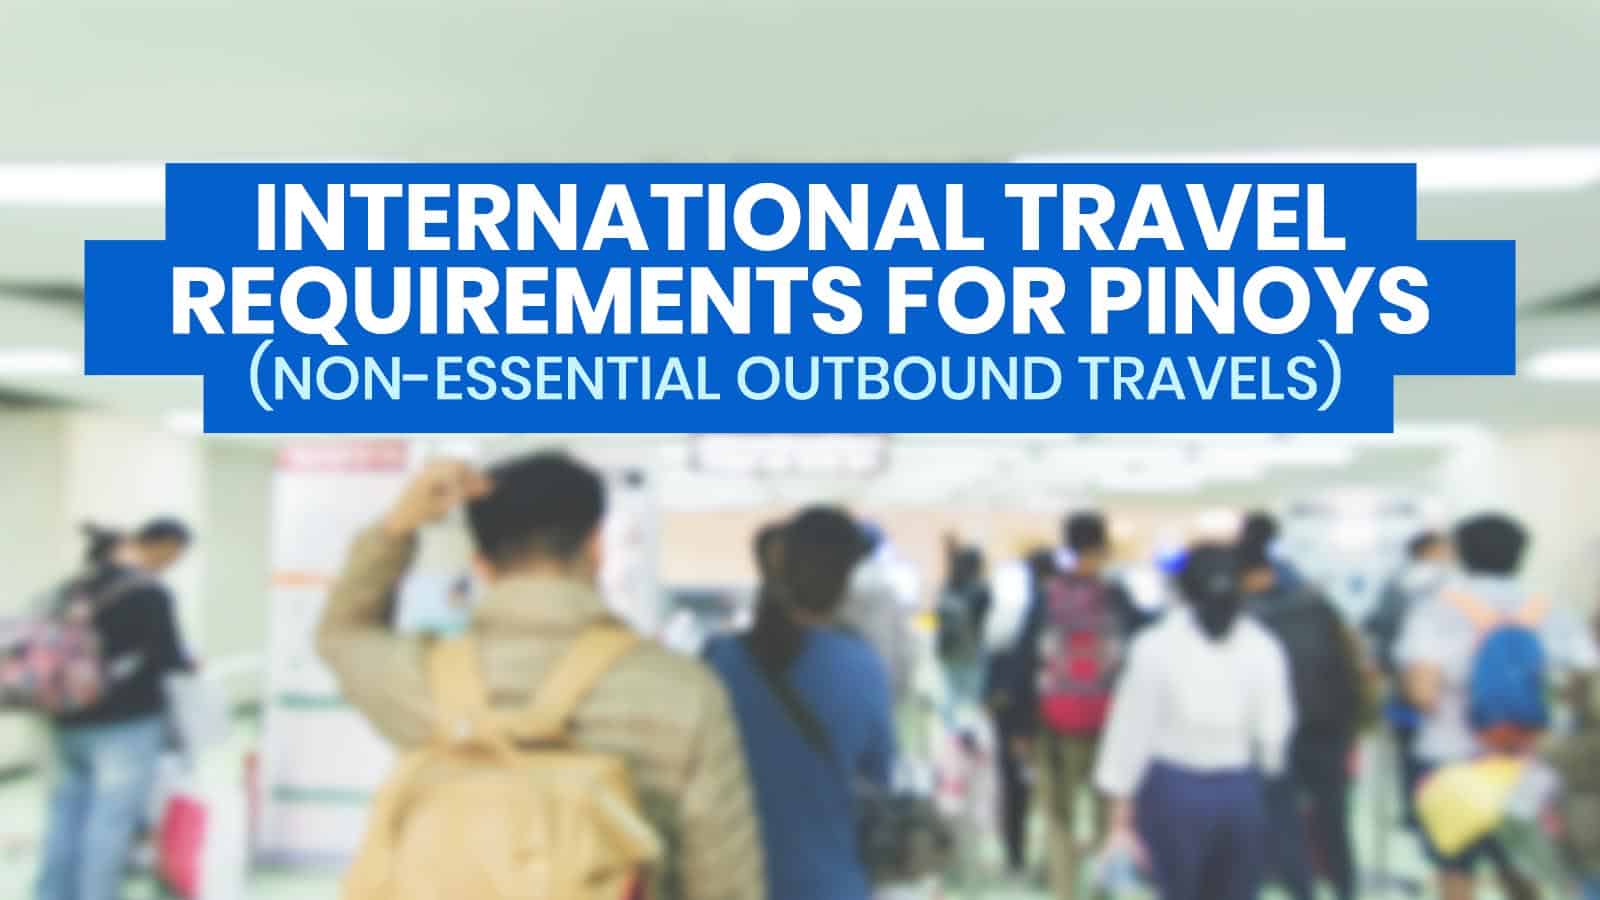 Requirements for FILIPINOS TRAVELING ABROAD: Non-Essential Outbound Travels